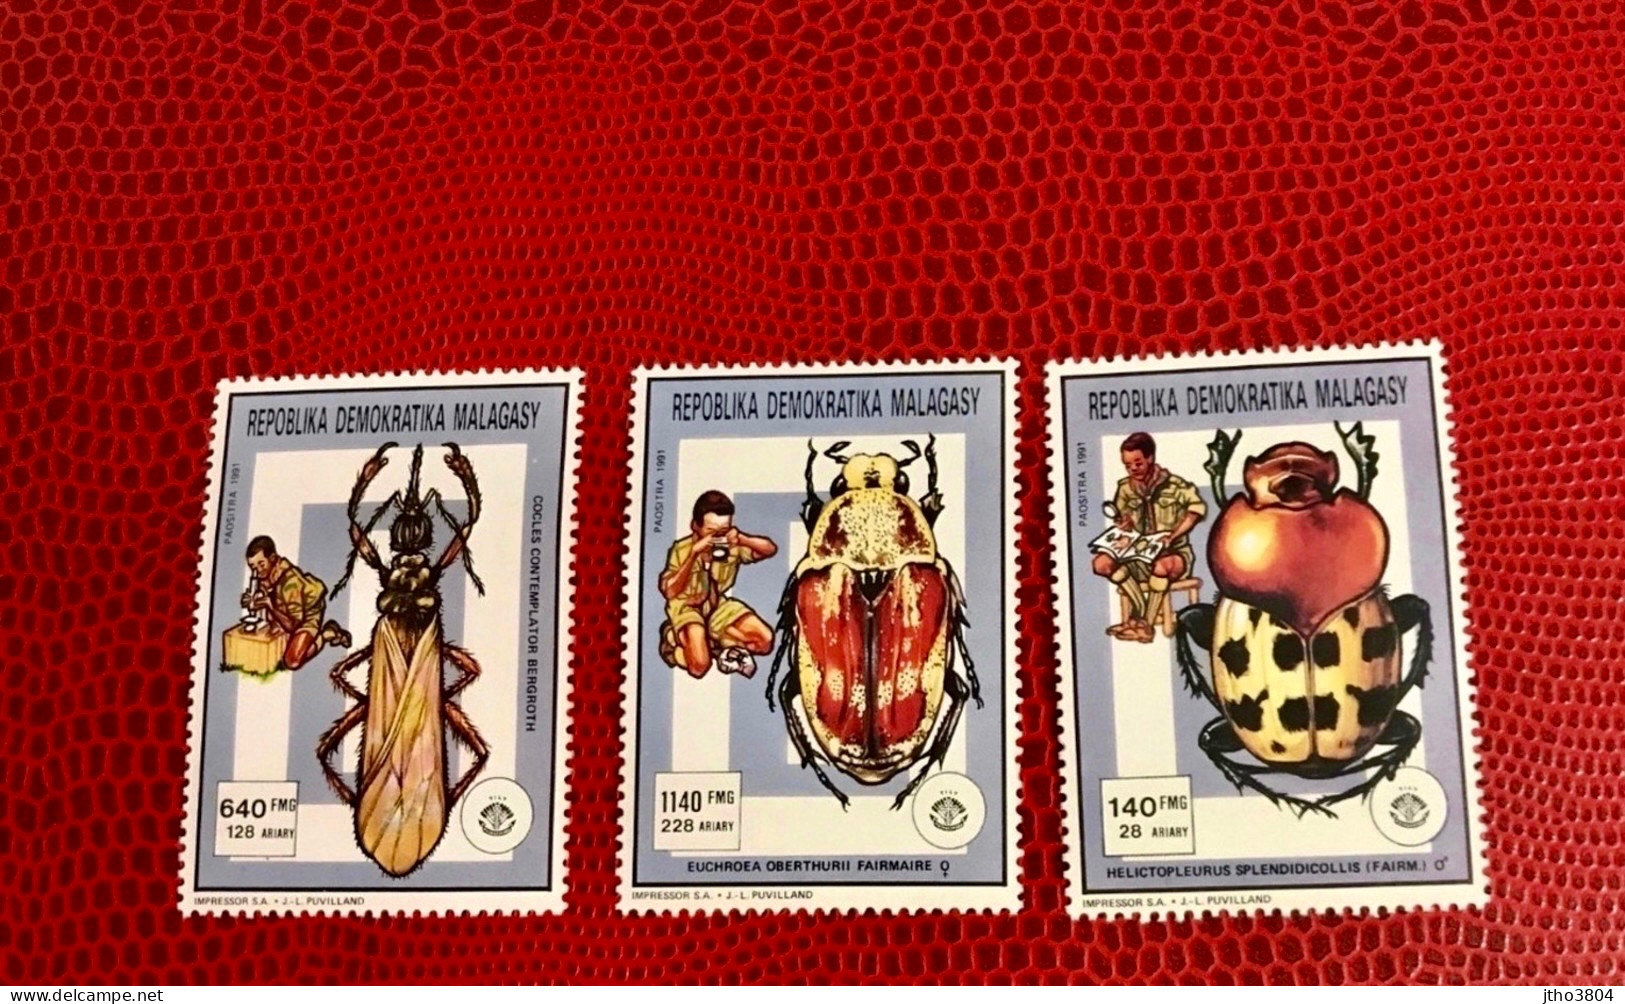 MADAGASCAR 1991 3v Neuf MNH ** YT 994 / 996 Insecto Insect Insekt Inseto Insetto Malagasy Madagaskar - Coléoptères